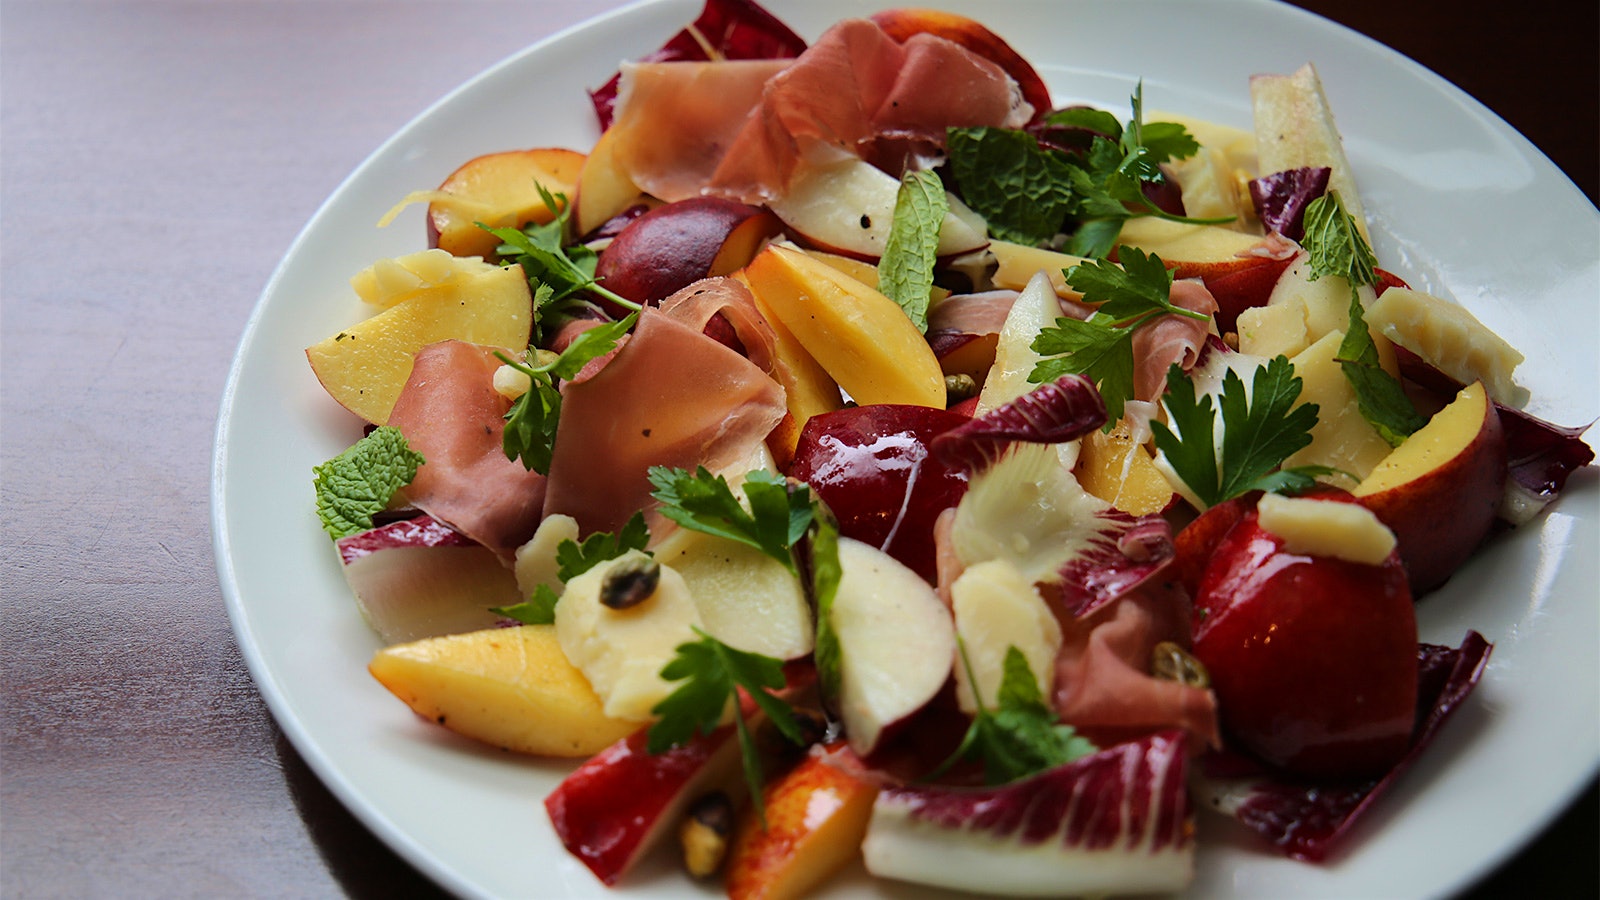  Plate of salad containing peaches, radicchio, prosciutto, aged cheddar, pistachios and mint 